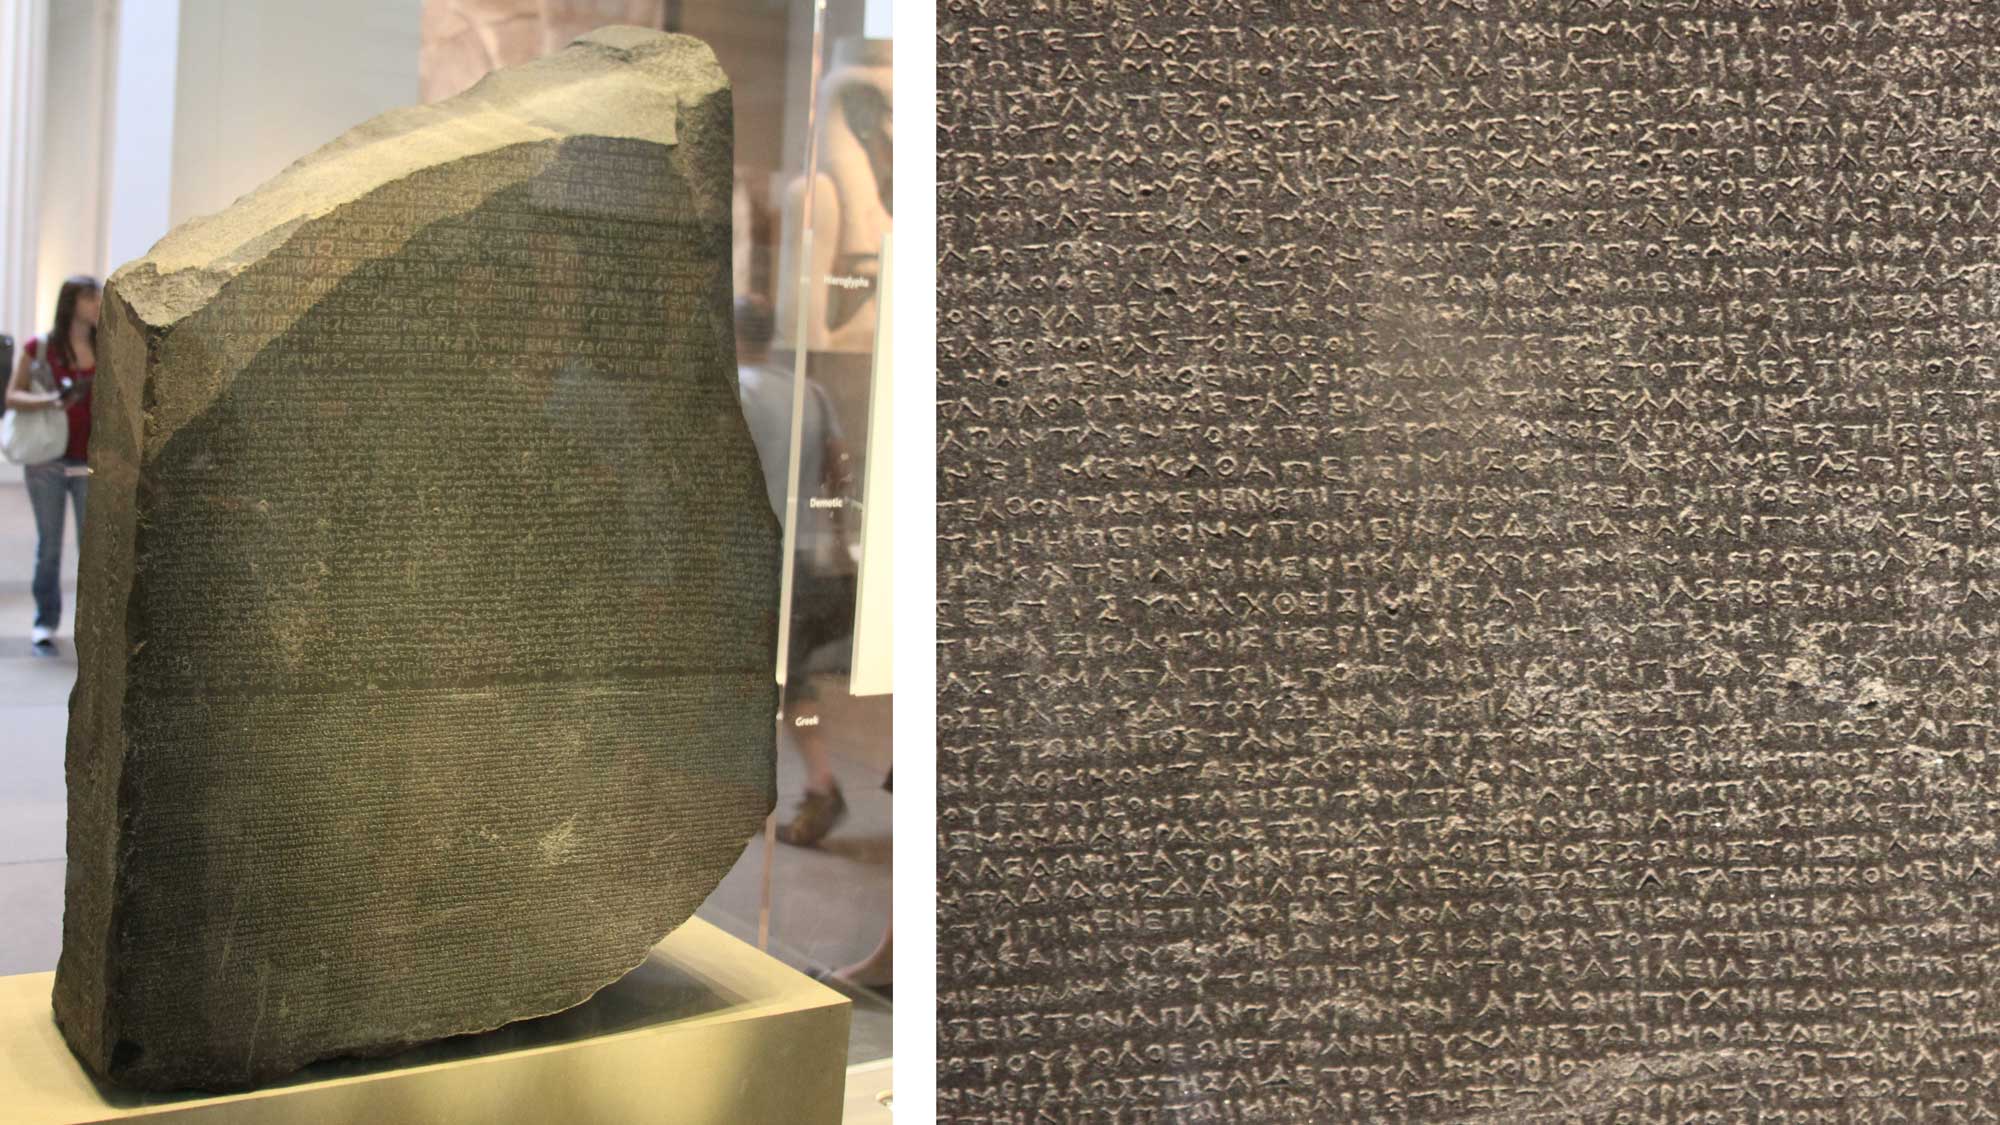 Photograph of the Rosetta Stone, including a close-up shot of the inscribed text.